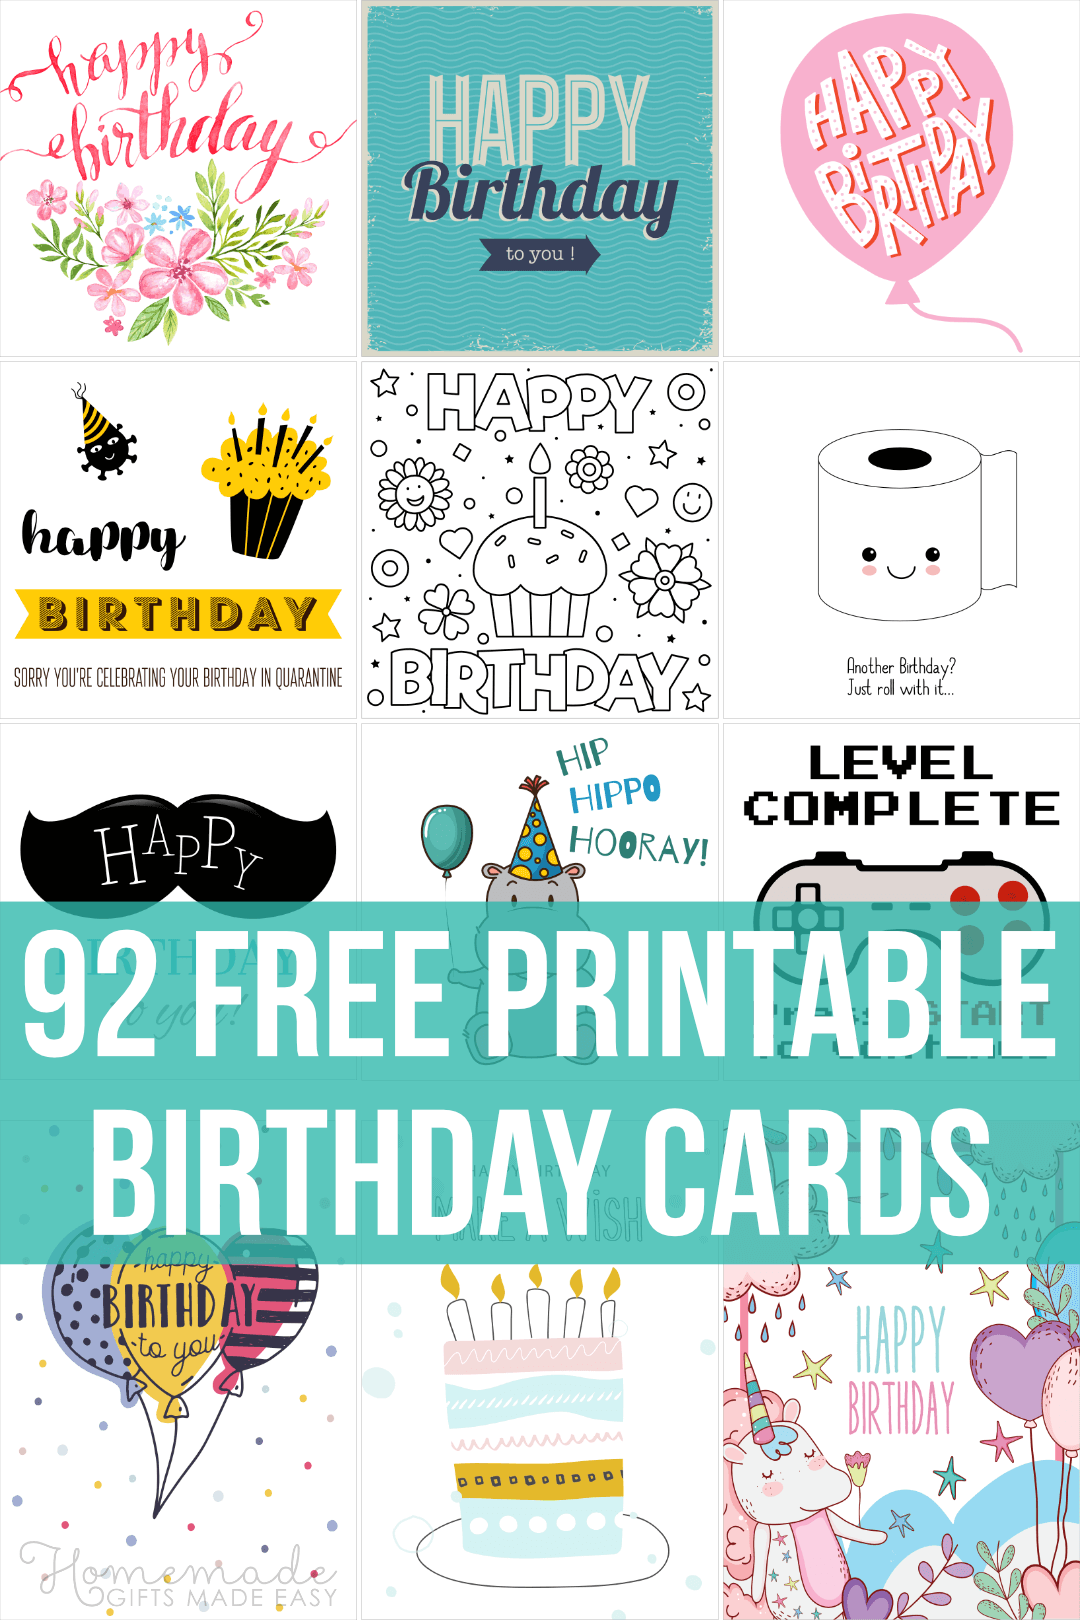 Happy Birthday Printable Card And Envelope  Instant Download PDF  Cupcake Birthday Card Template